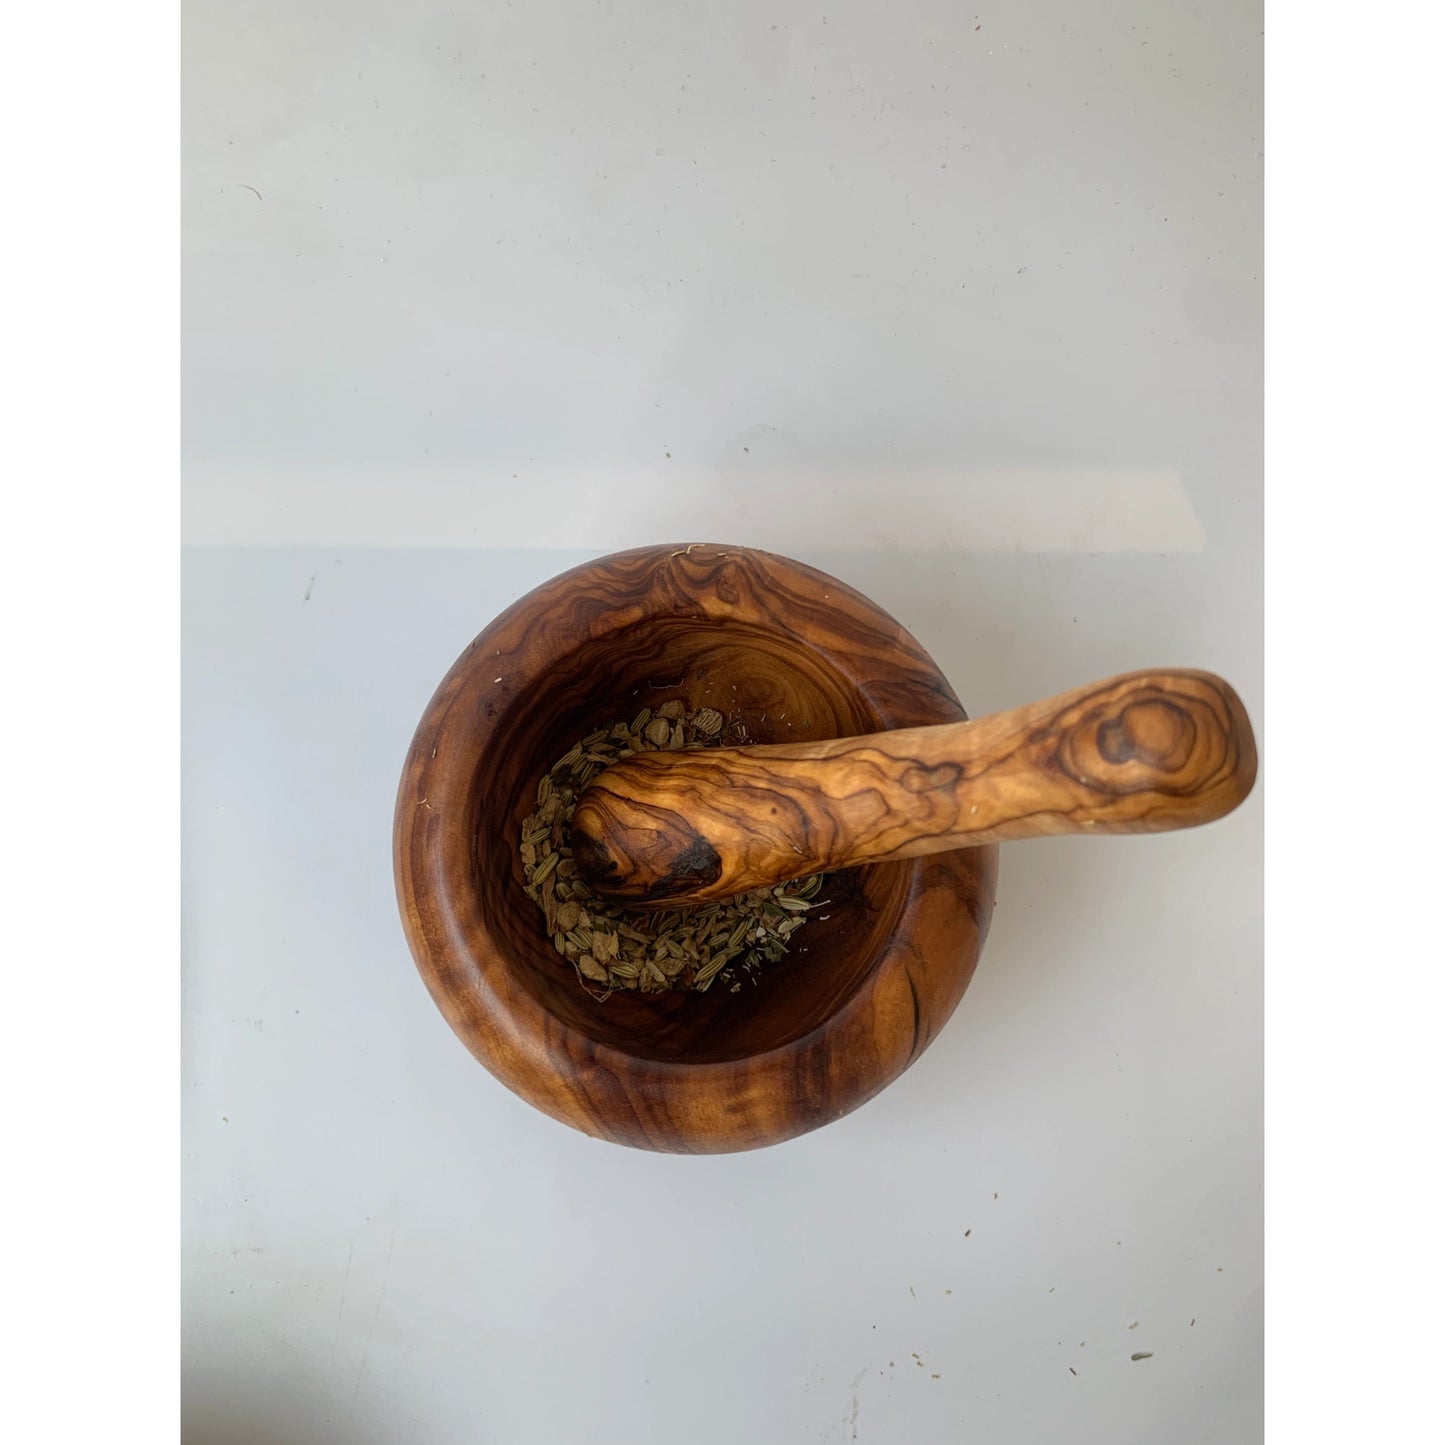 Olive wood mortar and pestle